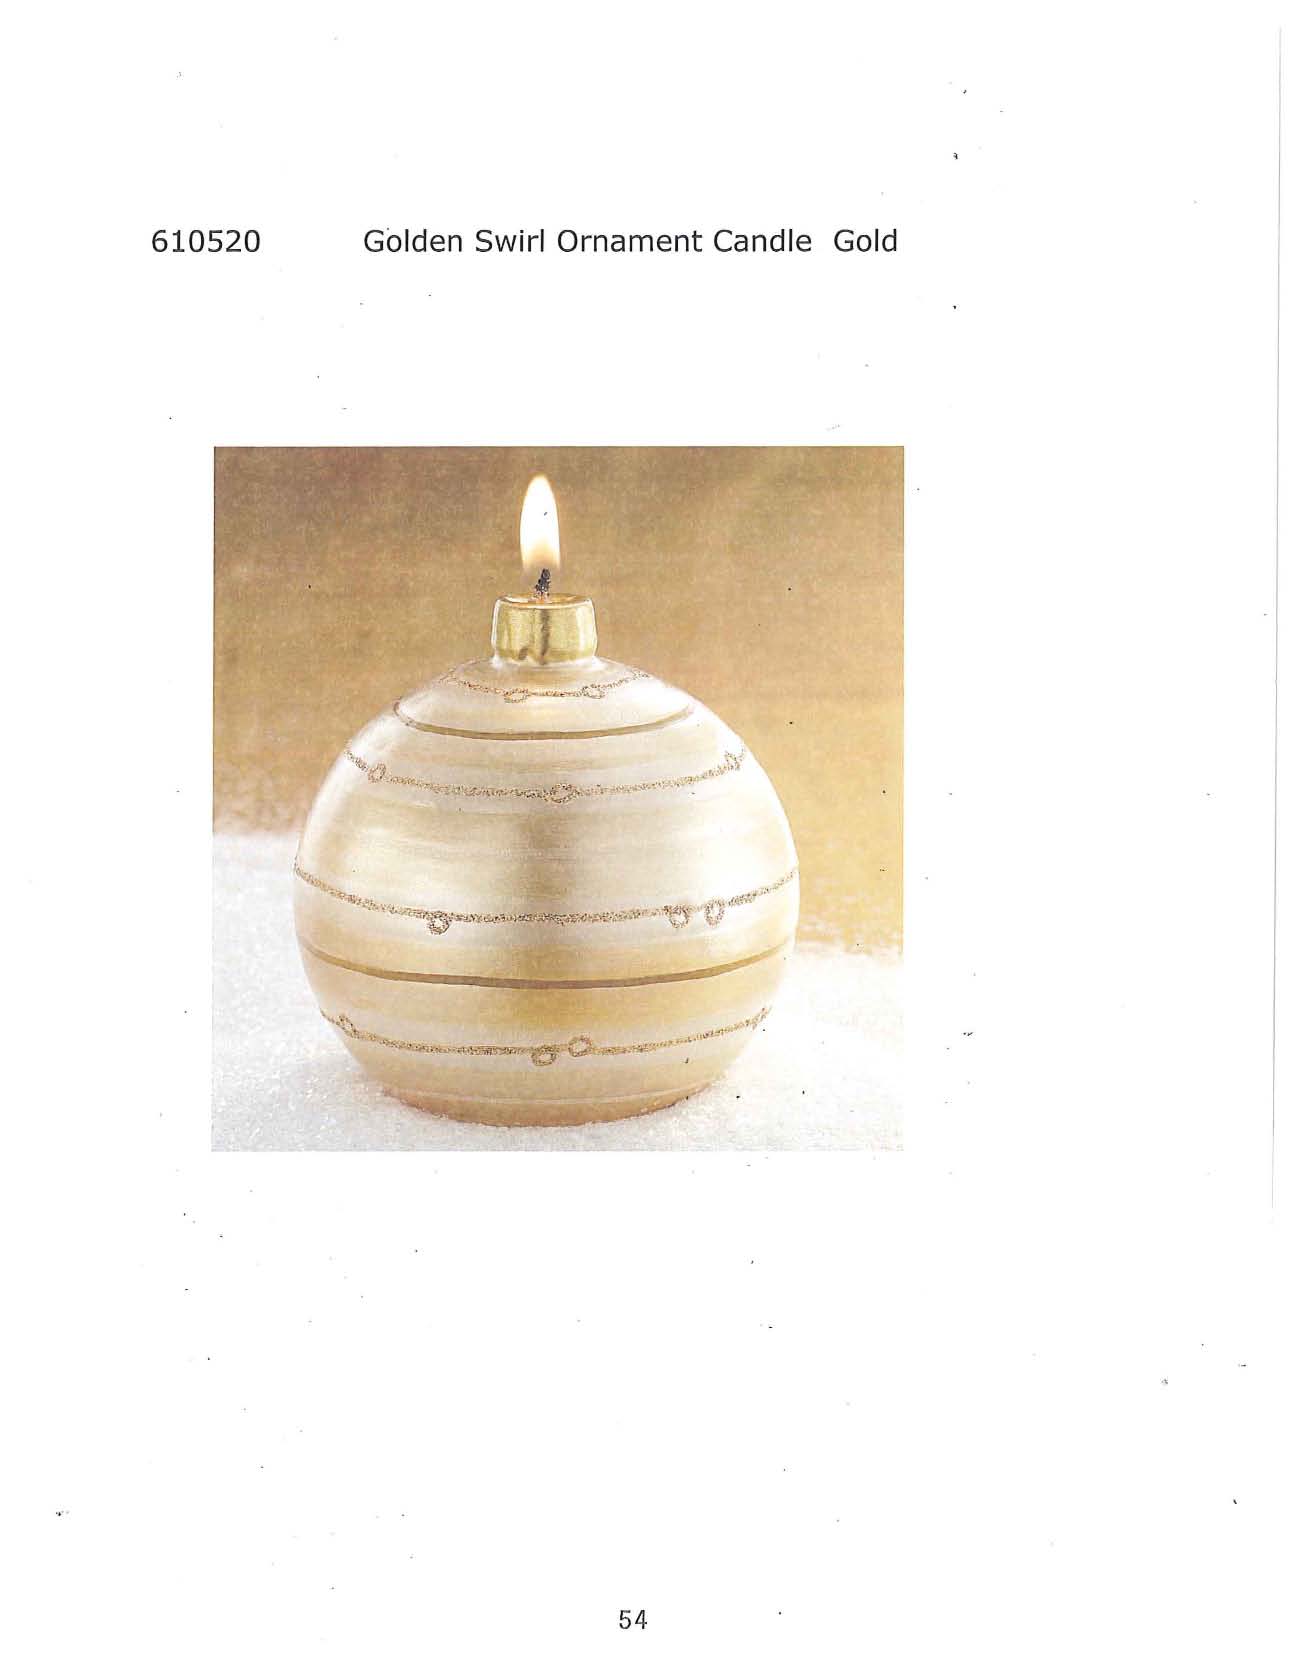 Golden Swirl Ornament Candle - Gold